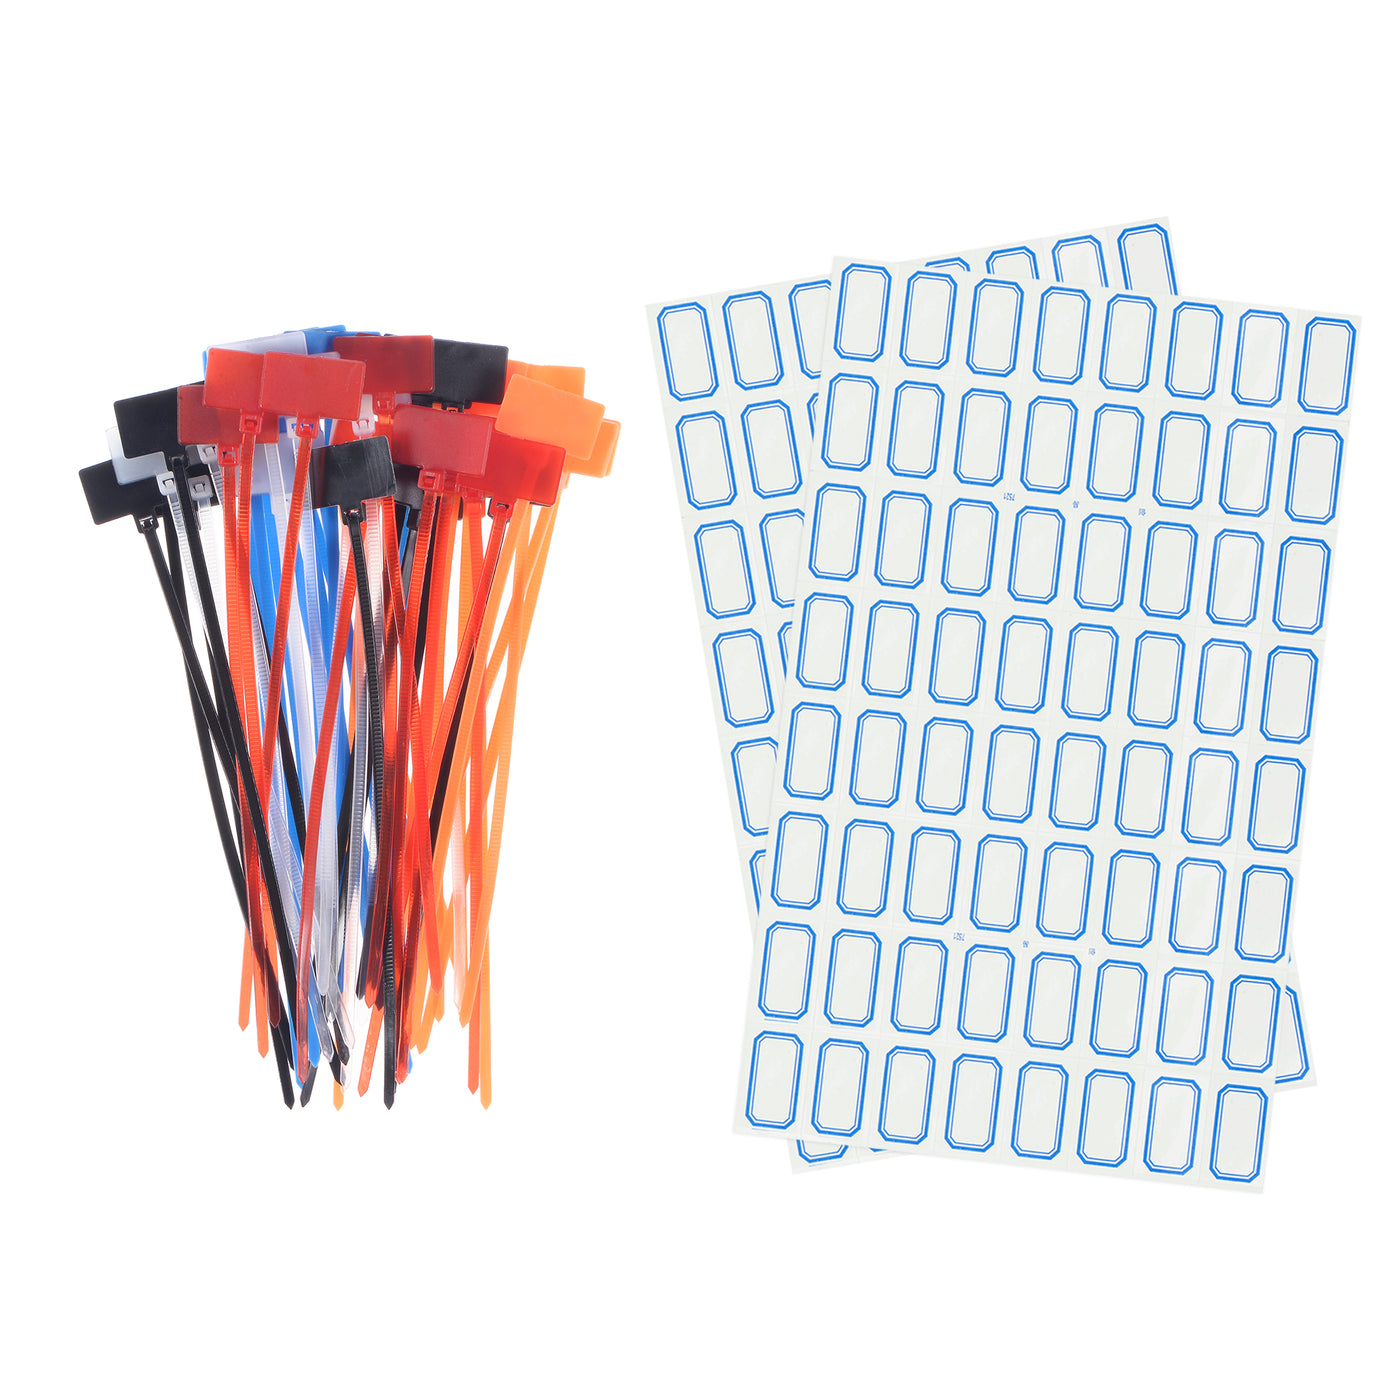 uxcell Uxcell 50pcs Nylon Cable Ties Tags Label Marker Self-Locking for Marking Organizing 5 Colors